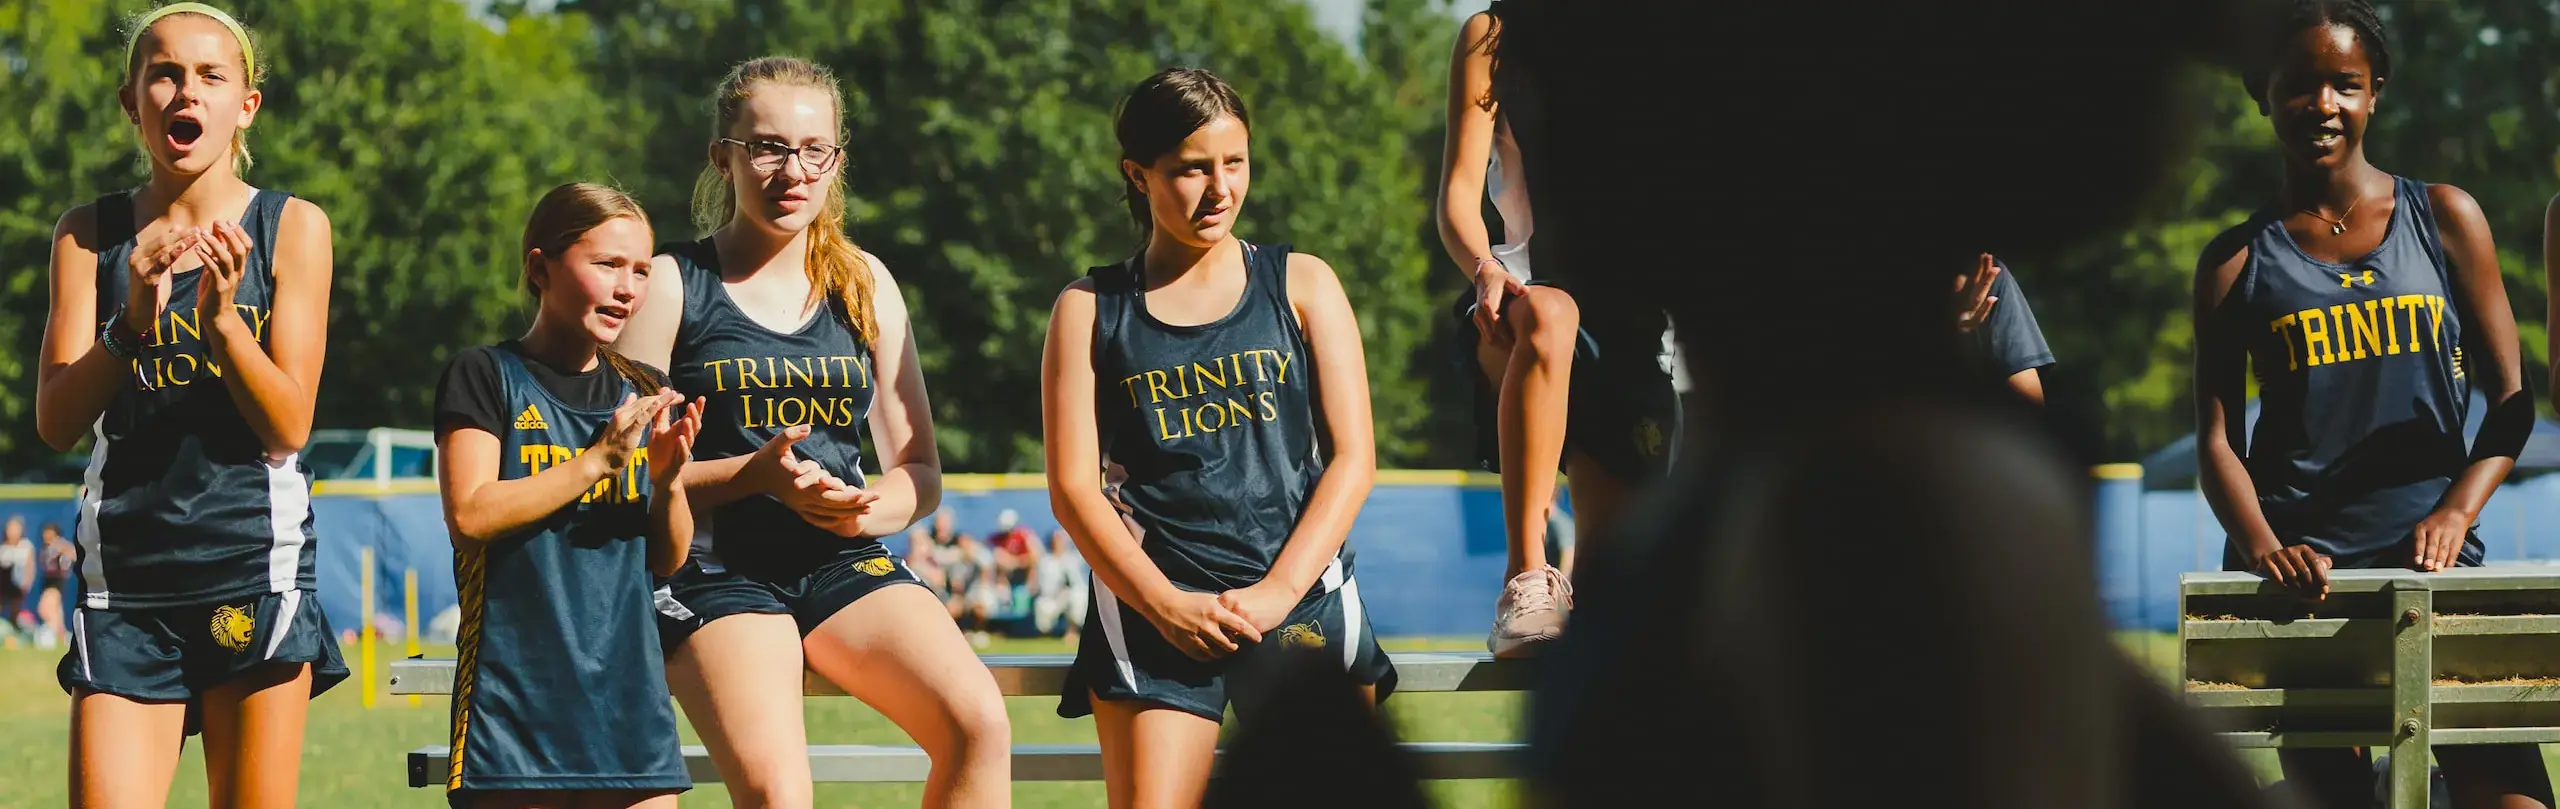 A team of young female cross country athletes in Trinity Lions uniforms enthusiastically cheering on a teammate from the sidelines on a sunny day.